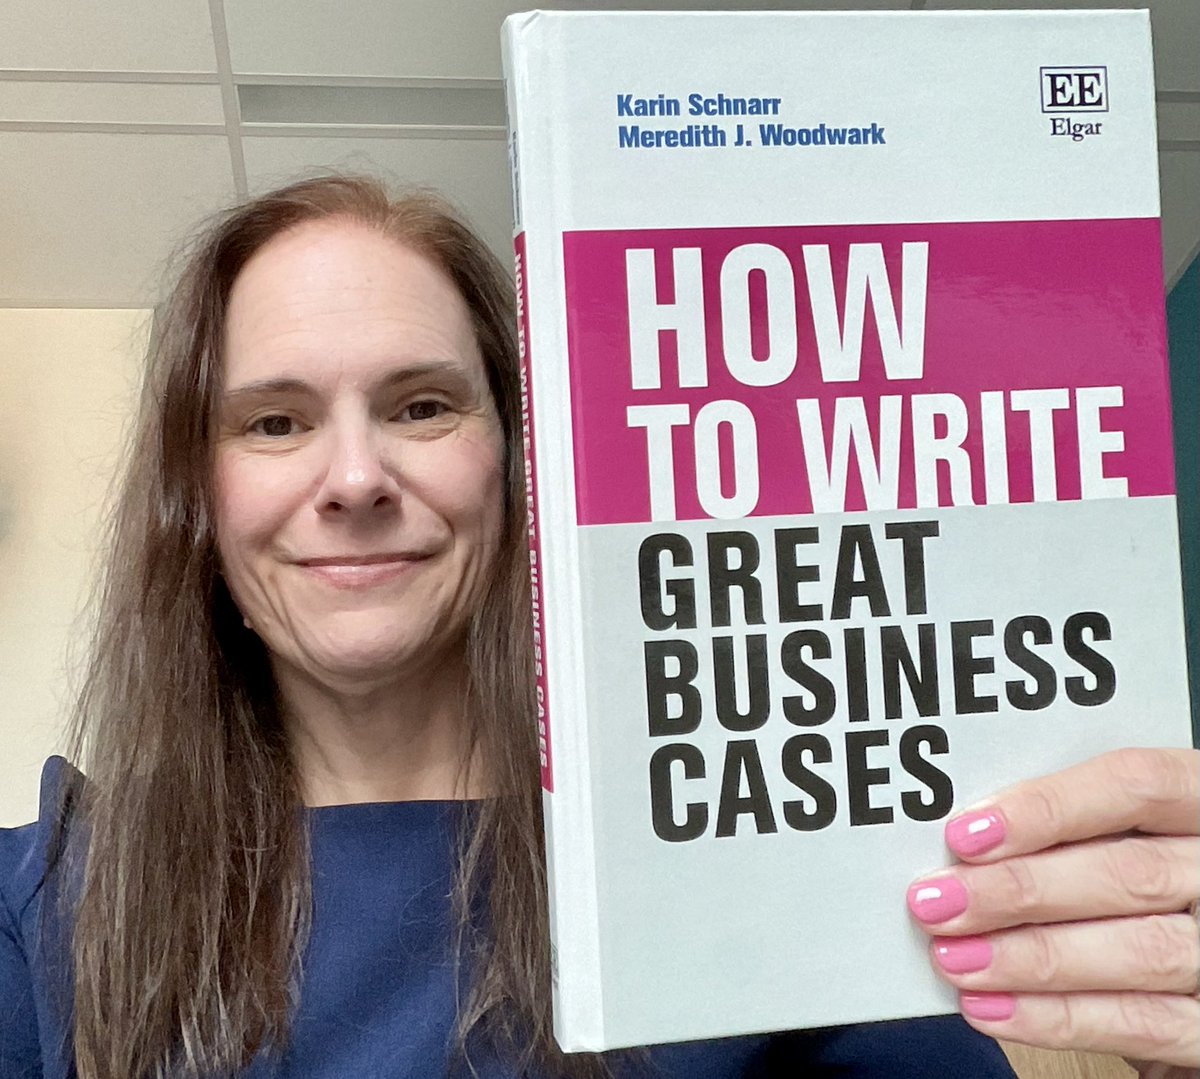 So excited that @mwoodwark and my book on writing great business cases has now been published and is available through Edward Elgar Publishing Ltd.  Truly a labour of love!  More info and available at e-Elgar.com/shop/usd/how-t….  #lazaridisschool #laurier